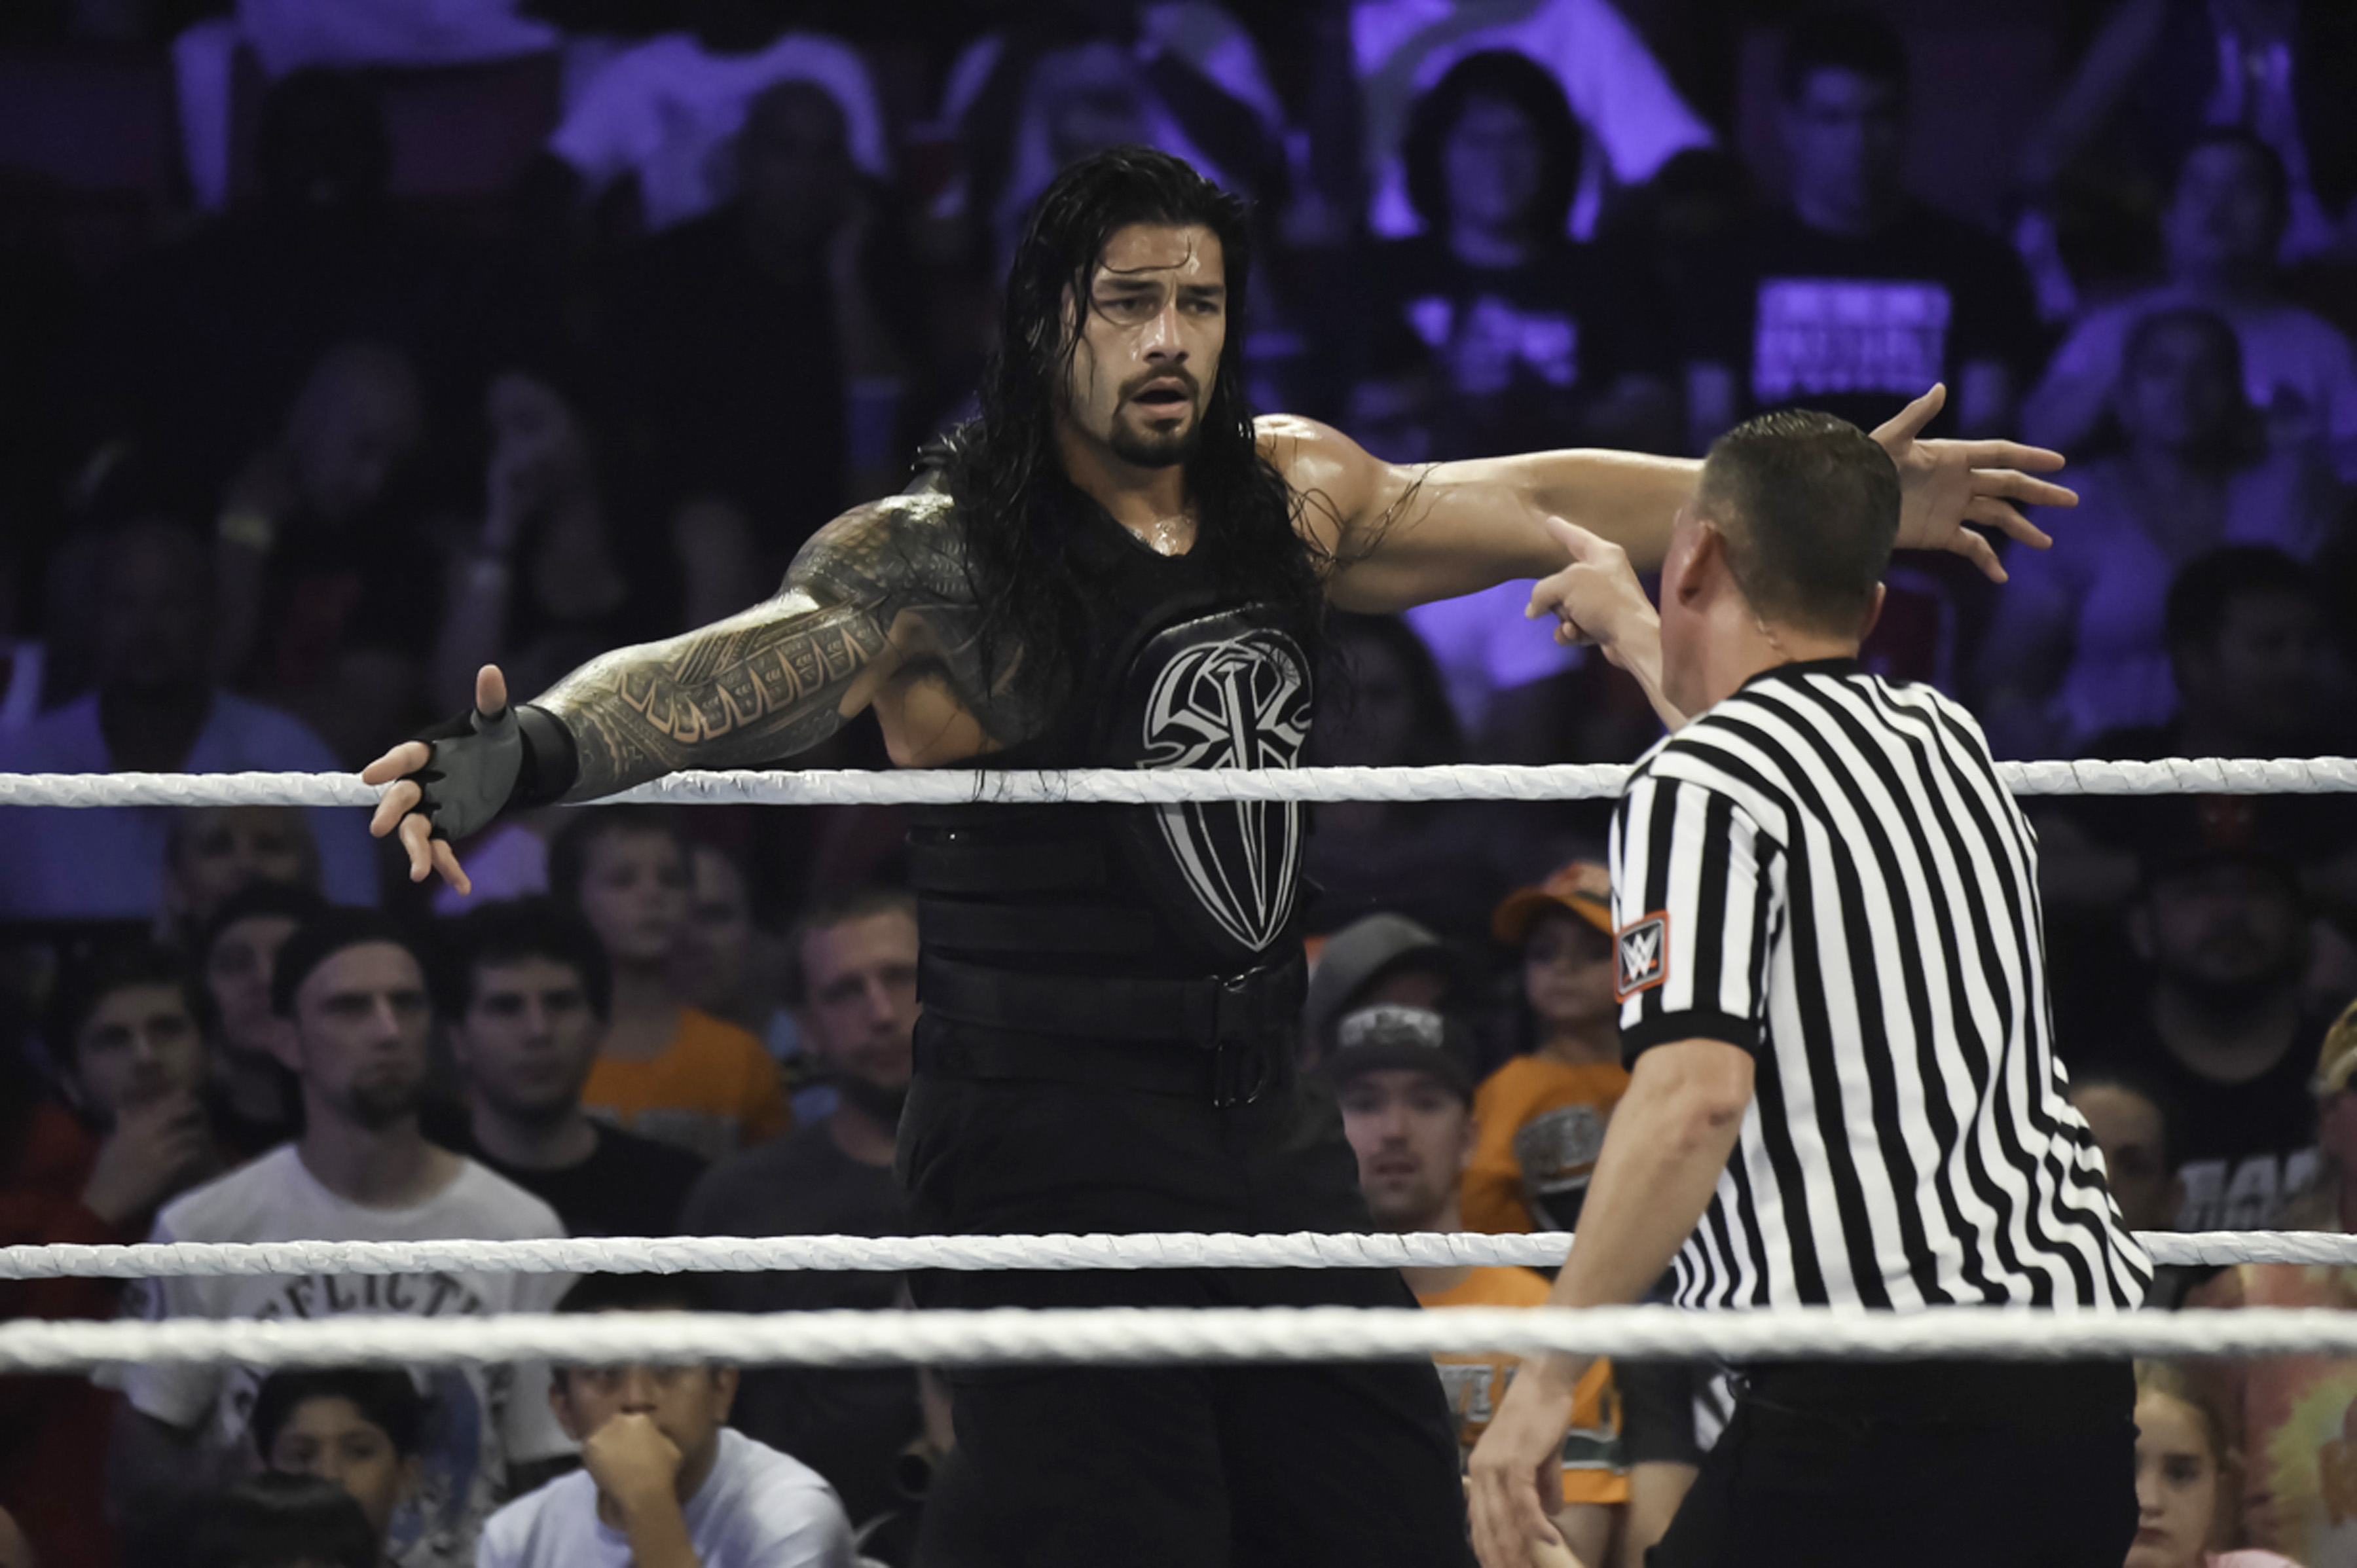 MIAMI, FL- SEPTEMBER 01: Roman Reigns reacts during the WWE Smackdown on September 1, 2015 at the American Airlines Arena in Miami, Florida. (Photo by Ron ElkmanSports Imagery/Getty Images)